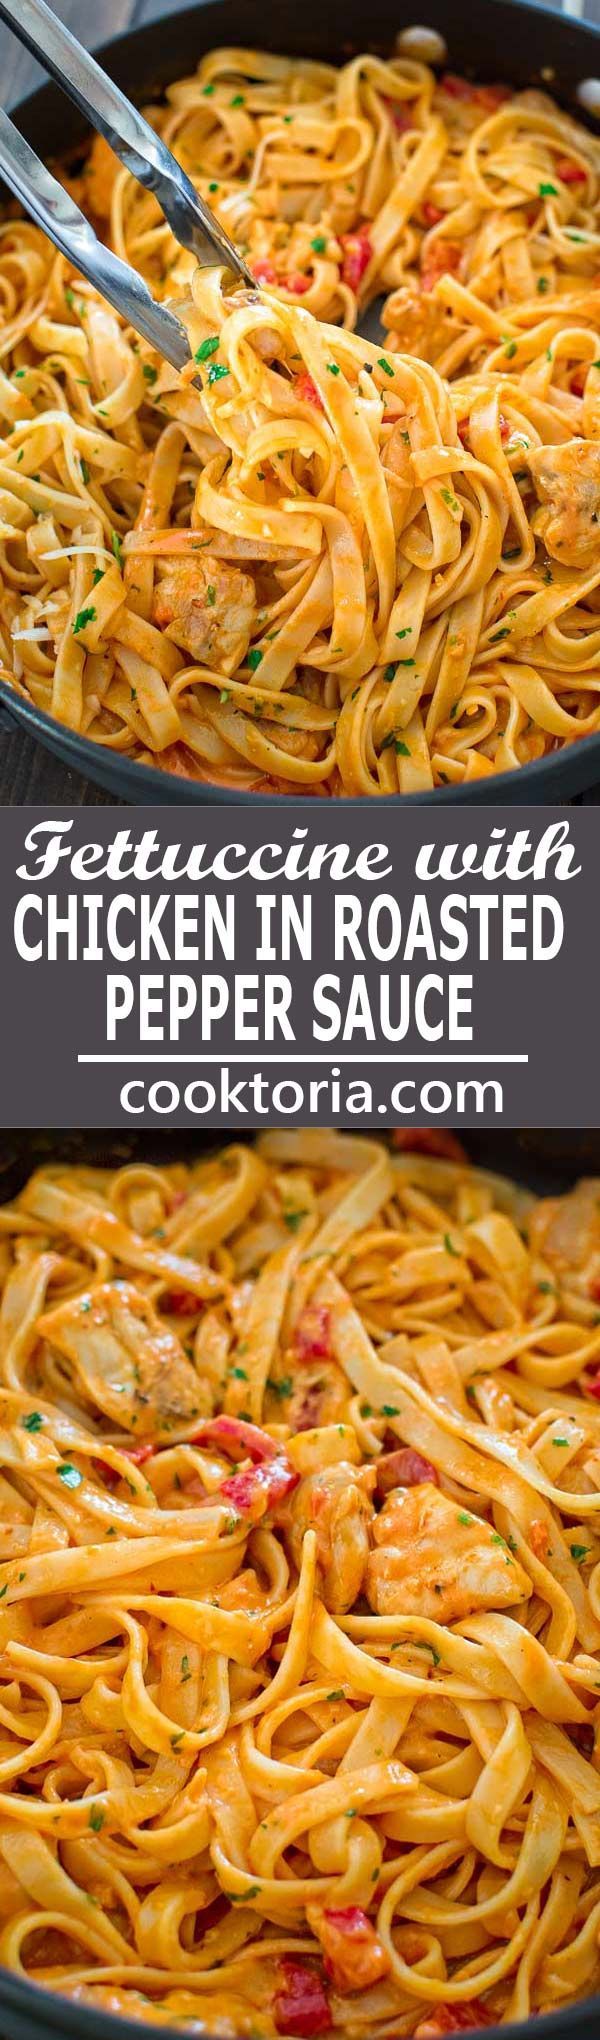 This elegant and creamy Fettuccine with Roasted Pepper Sauce and Chicken is made in under 30 minutes and requires just 6